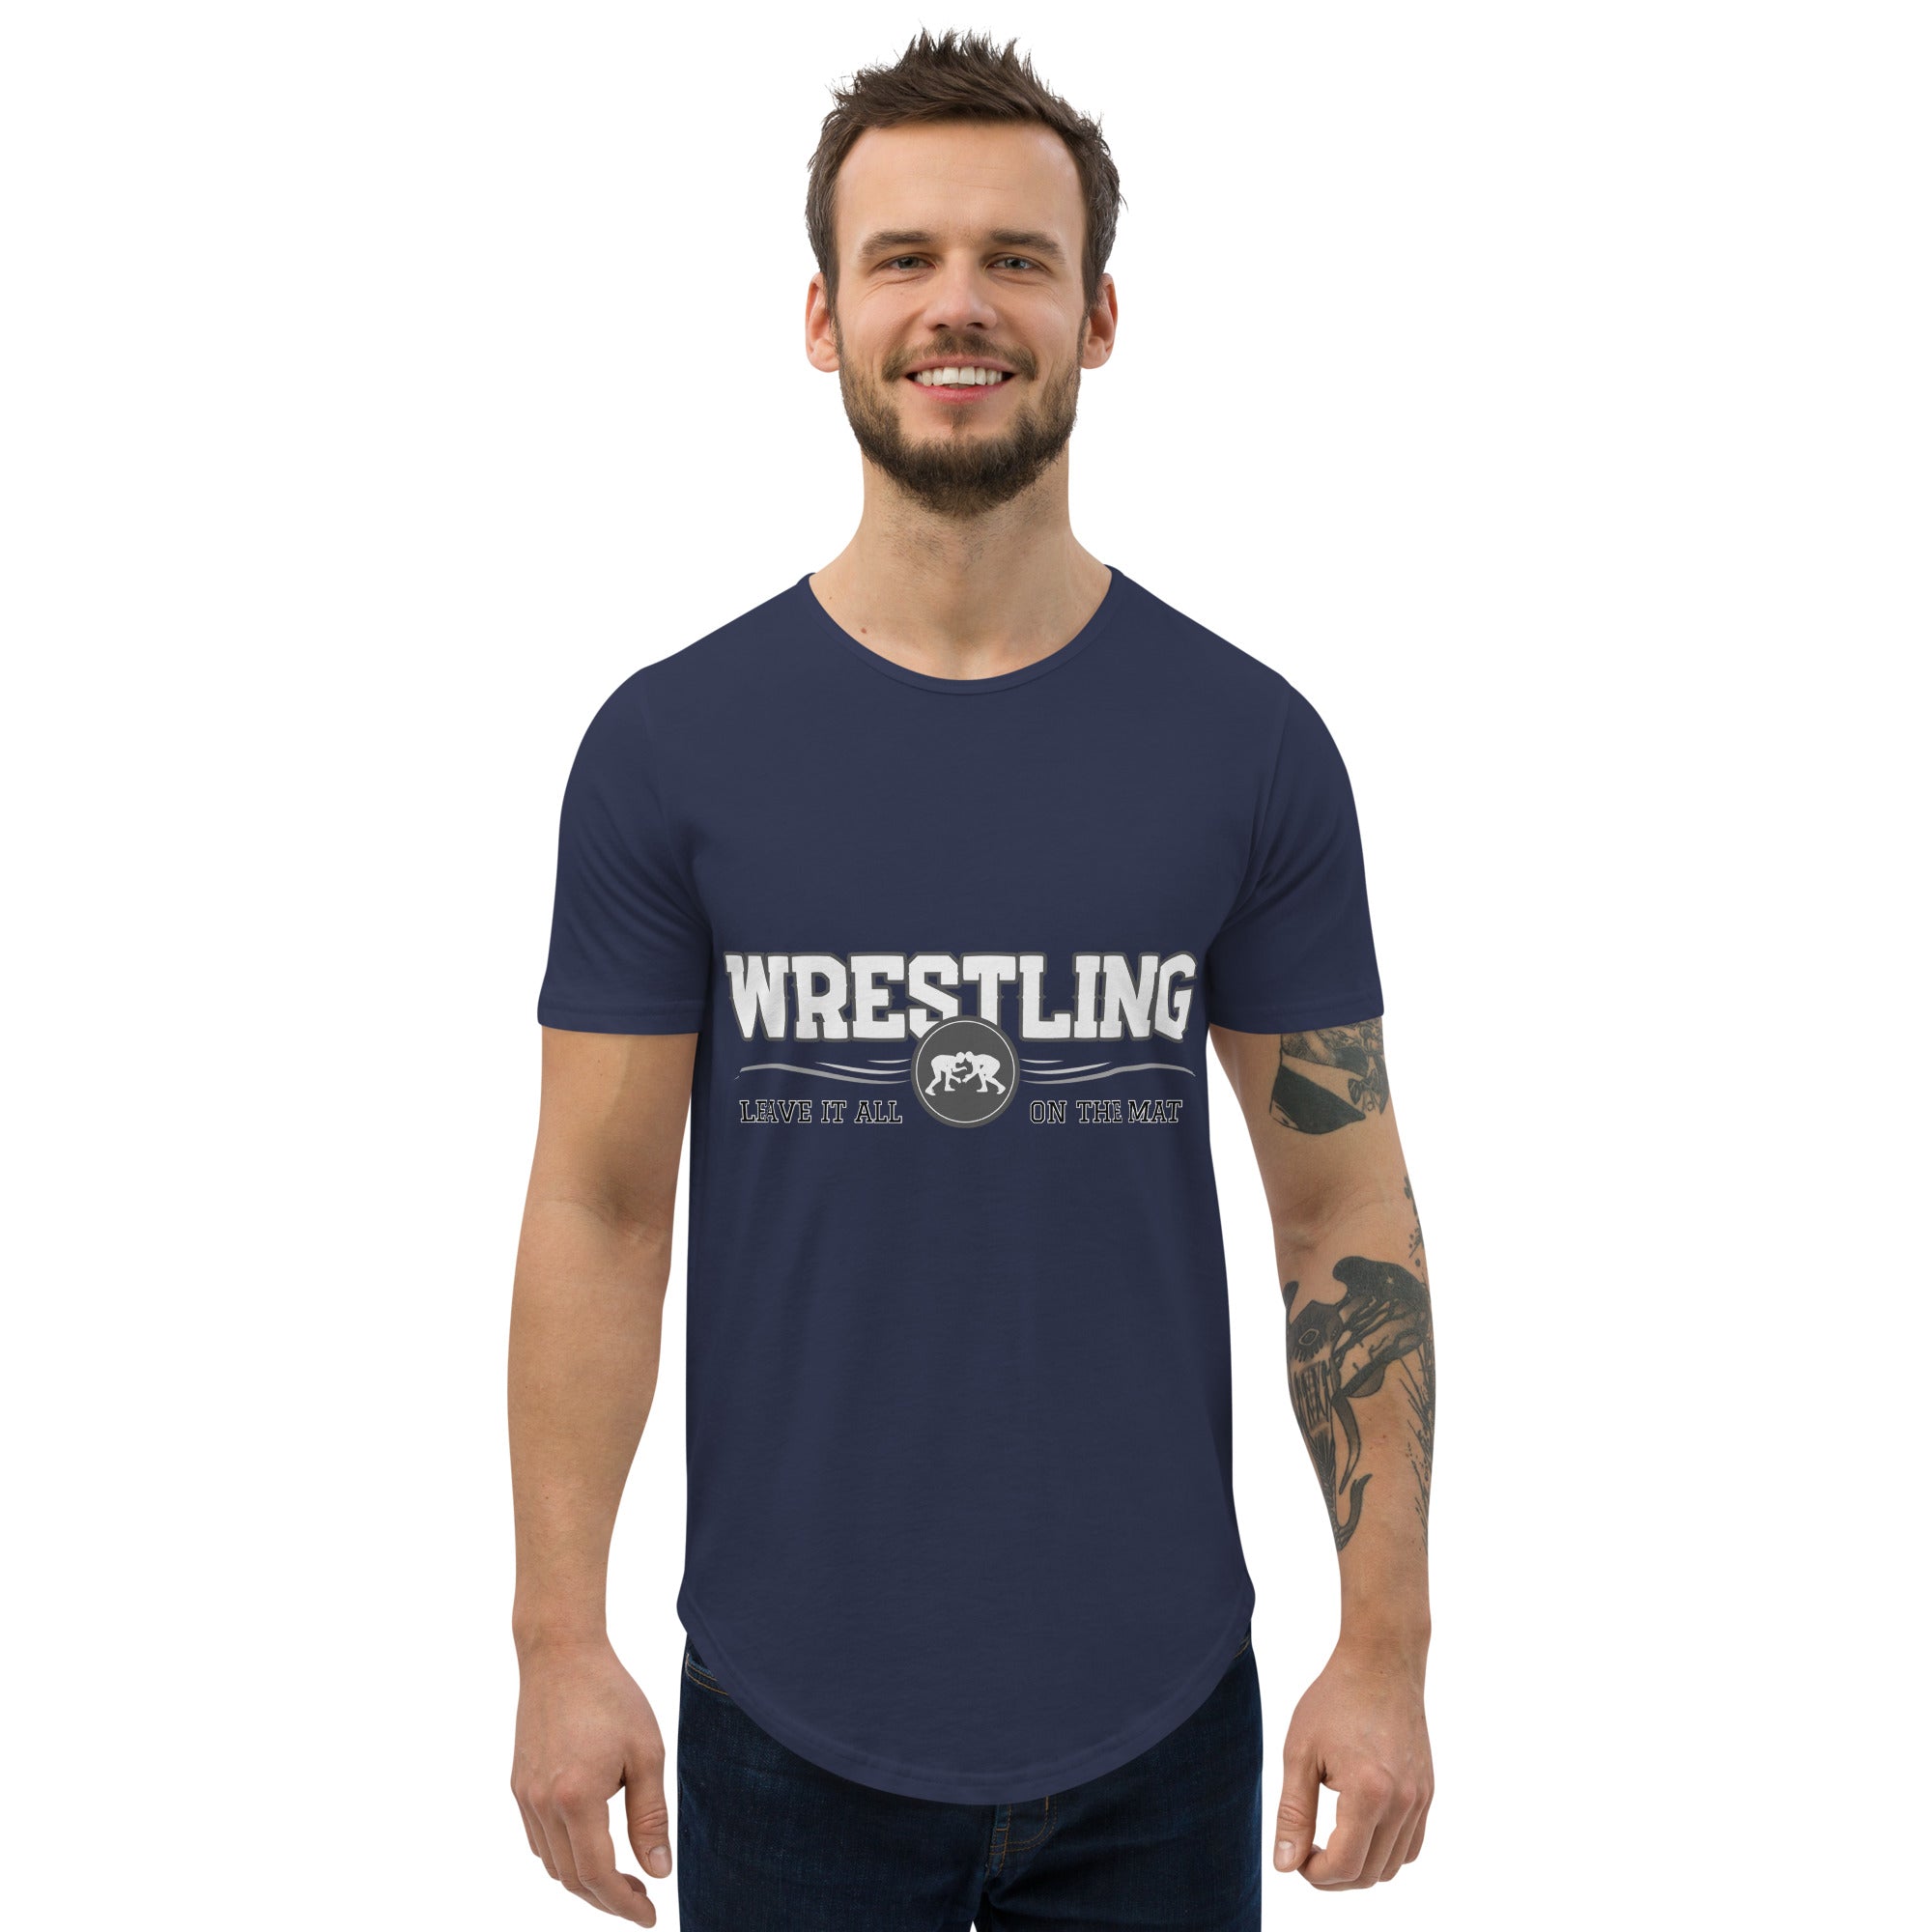 Leave It All On The Mat Curved Hem T-Shirt Iron Fist Wrestling Men's Curved Hem T-Shirt, Wrestling T-shirt